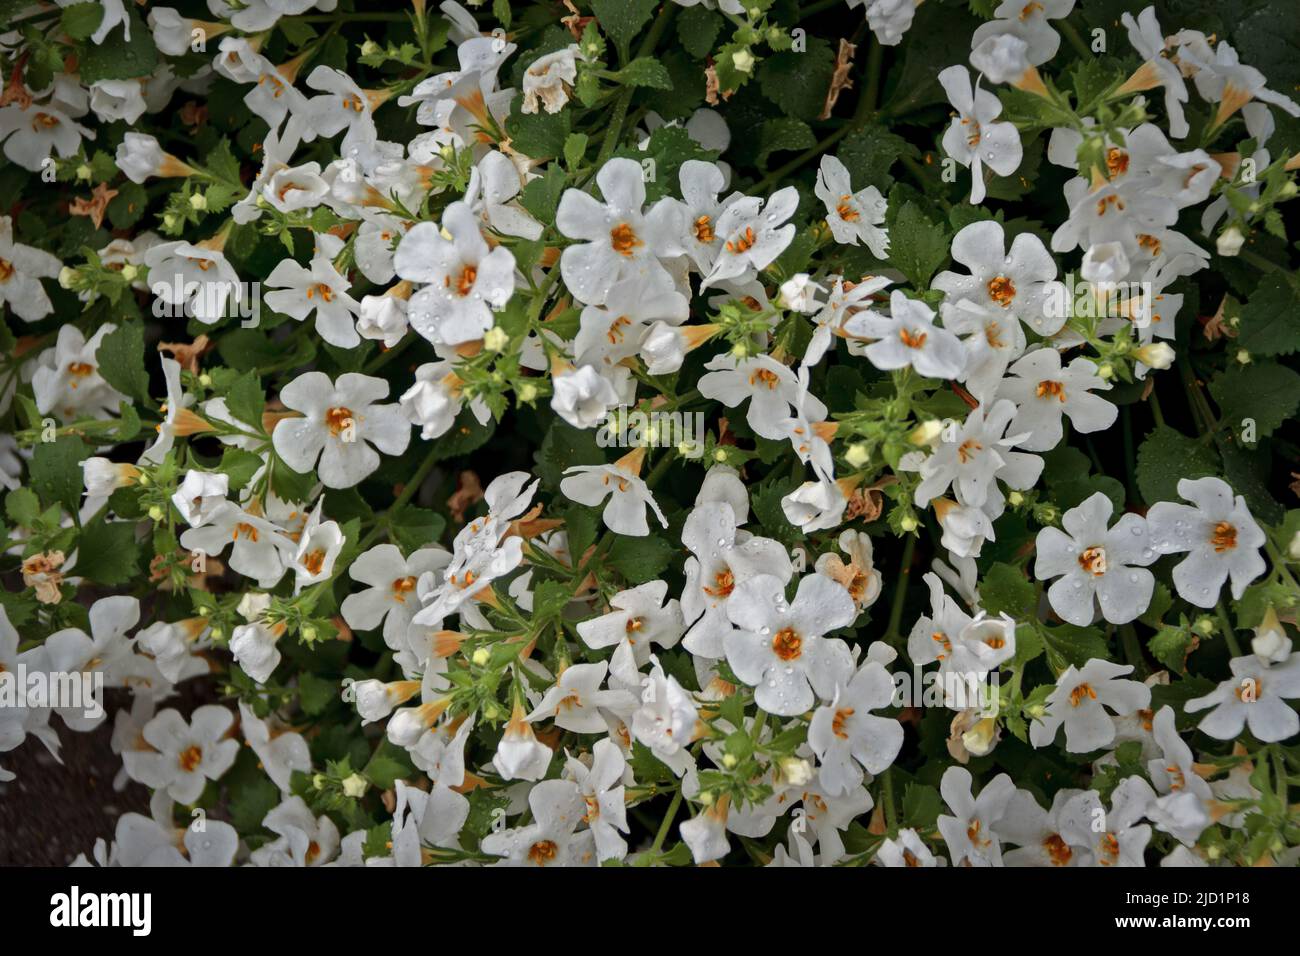 Bacopa monnieri herb plant and flower, known from Ayurveda as Brahmi. Bacopa monnieri herb is in ayurveda used to support brain health and cognitive f Stock Photo